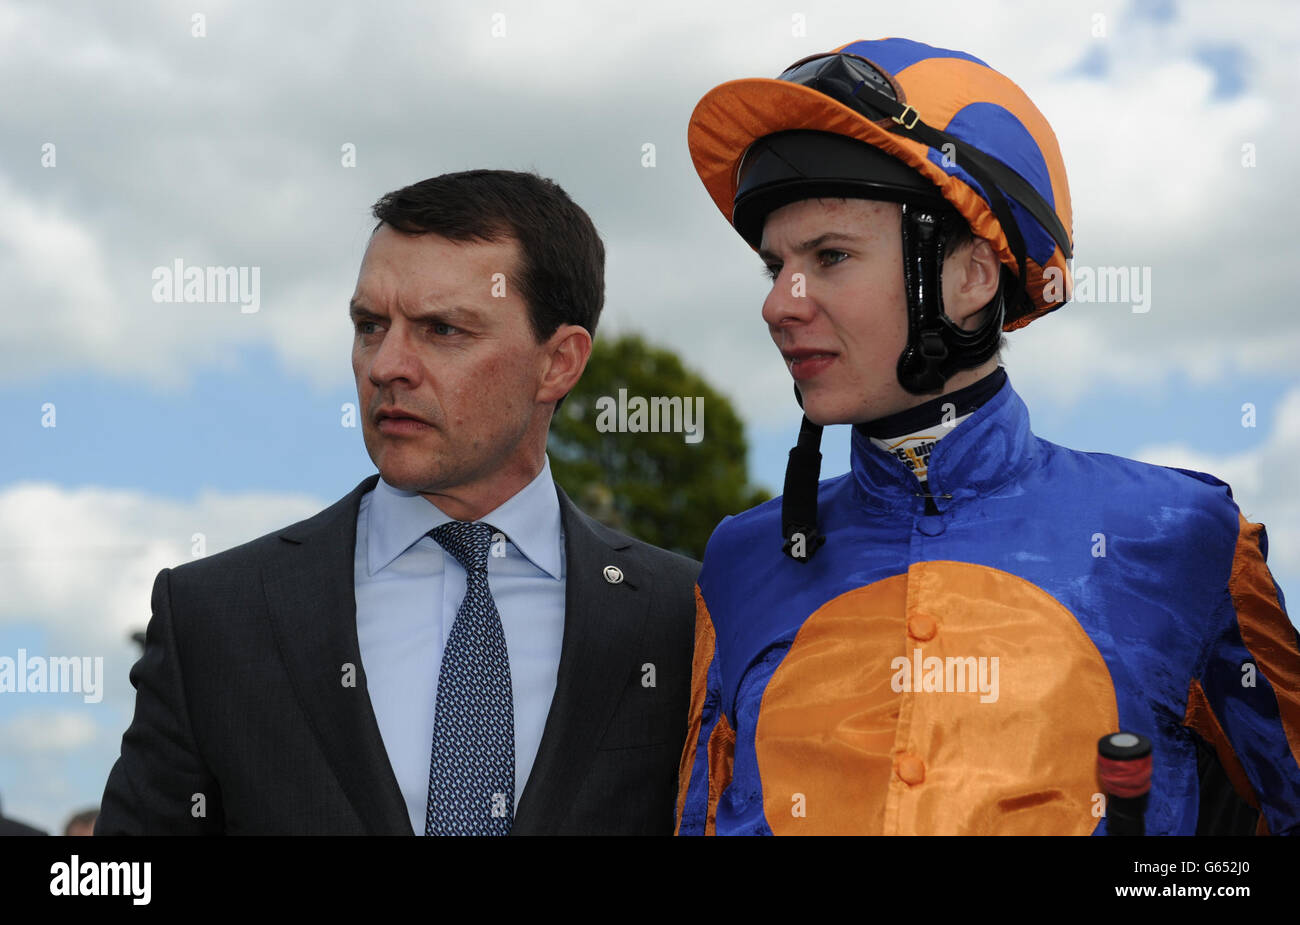 Trainer Aidan O'Brien and his son Jockey Joseph O'Brien after riding Magician to victory in the Tattersalls Irish 2,000 Guineas during the Tattersalls Irish 2000 Guineas Day at Curragh Racecourse, County Kildare. Stock Photo